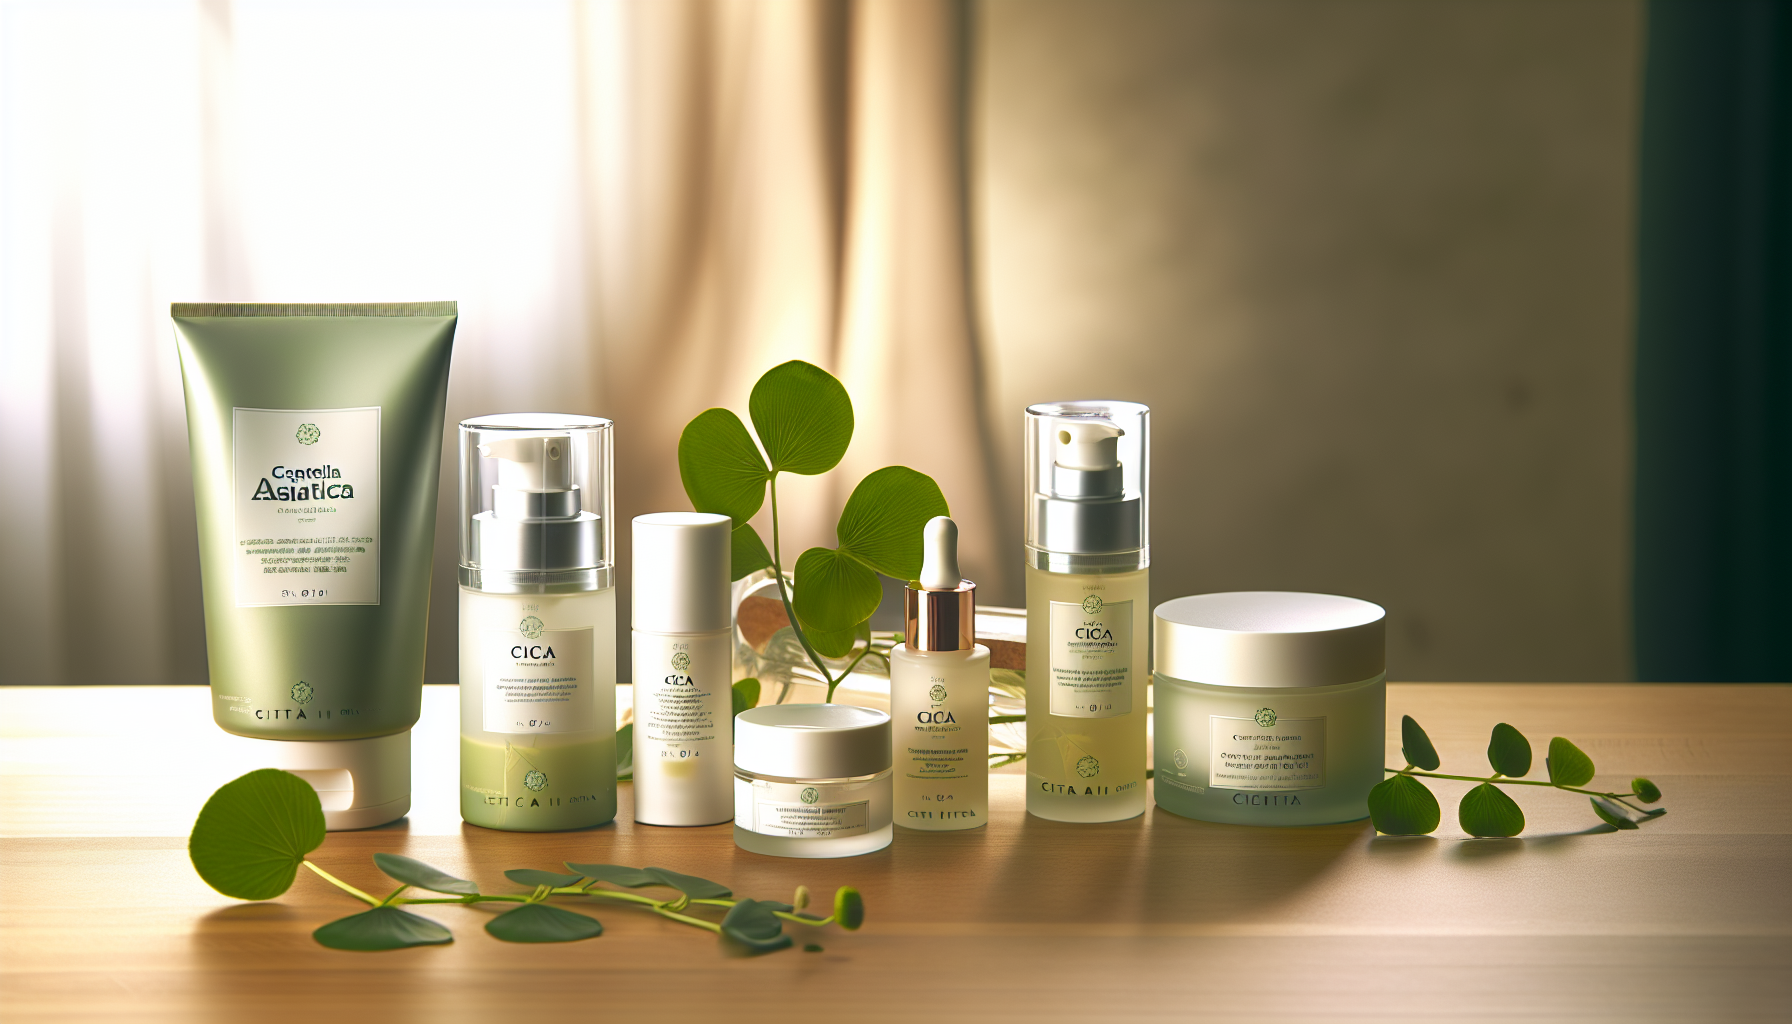 Various skincare products with Centella Asiatica extract for different skin types